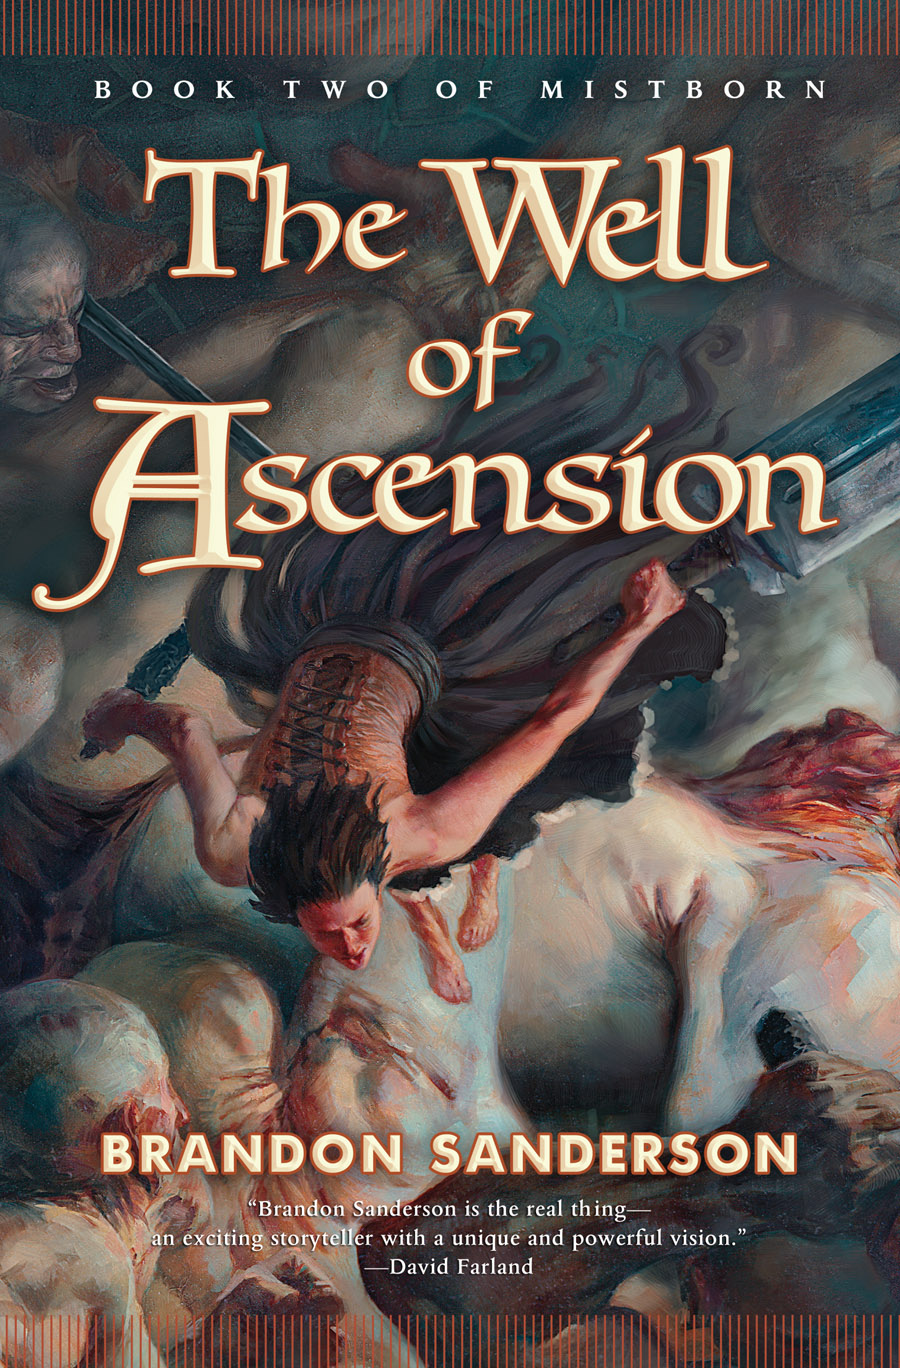 Mistborn: The Well of Ascension by Brandon Sanderson